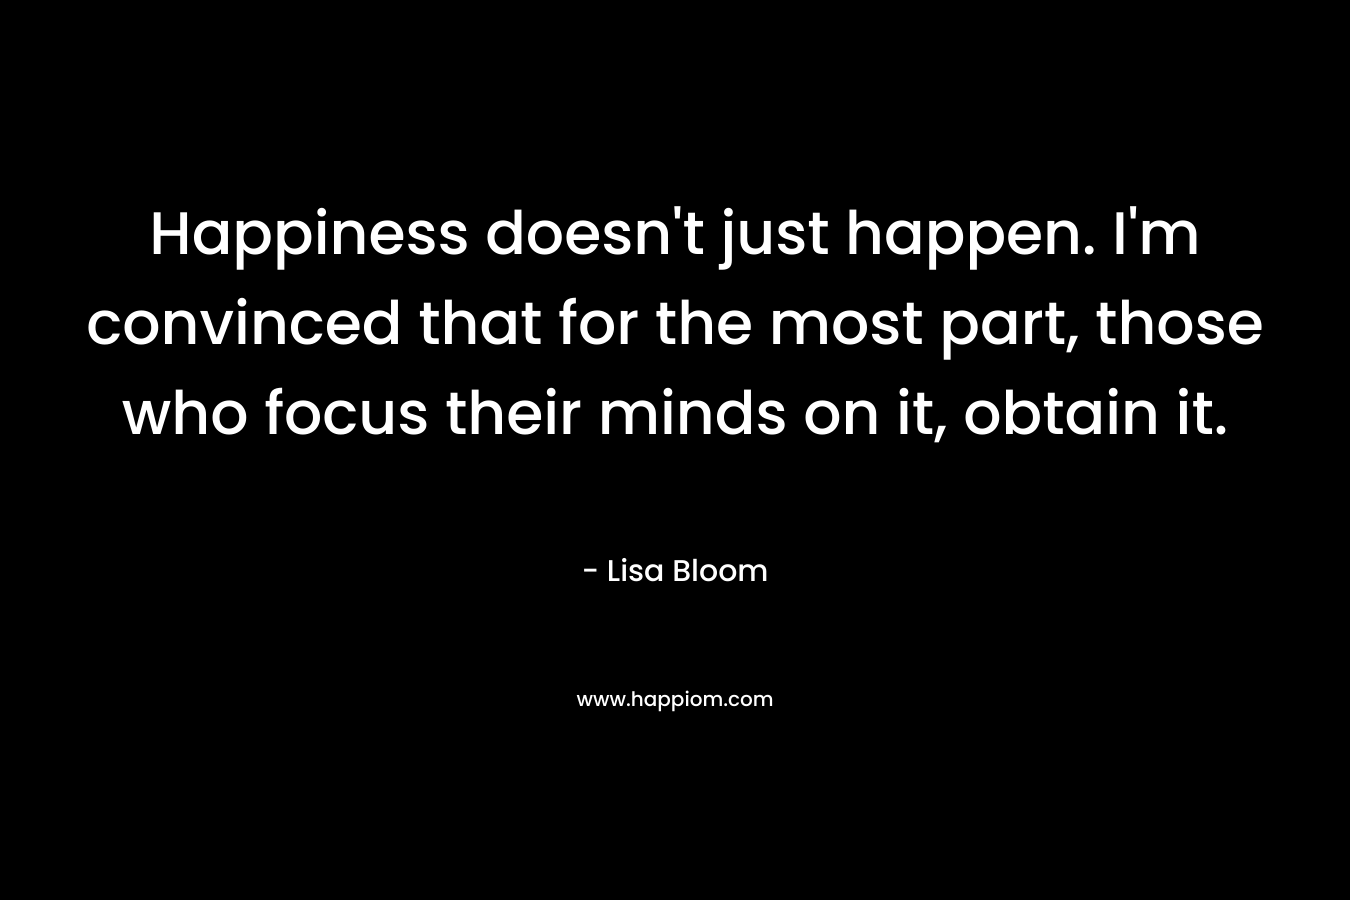 Happiness doesn’t just happen. I’m convinced that for the most part, those who focus their minds on it, obtain it. – Lisa Bloom